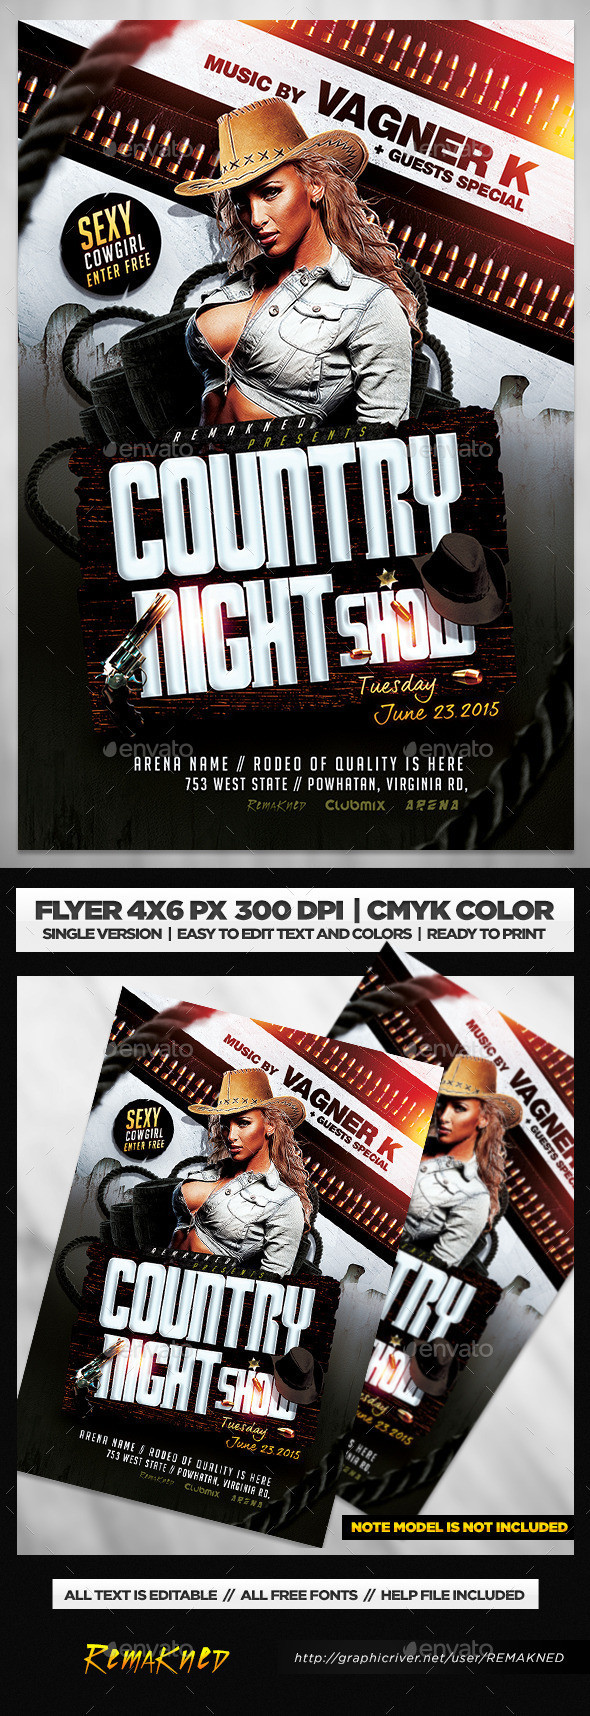 Country 20night 20show 20flyer 20template 20psd